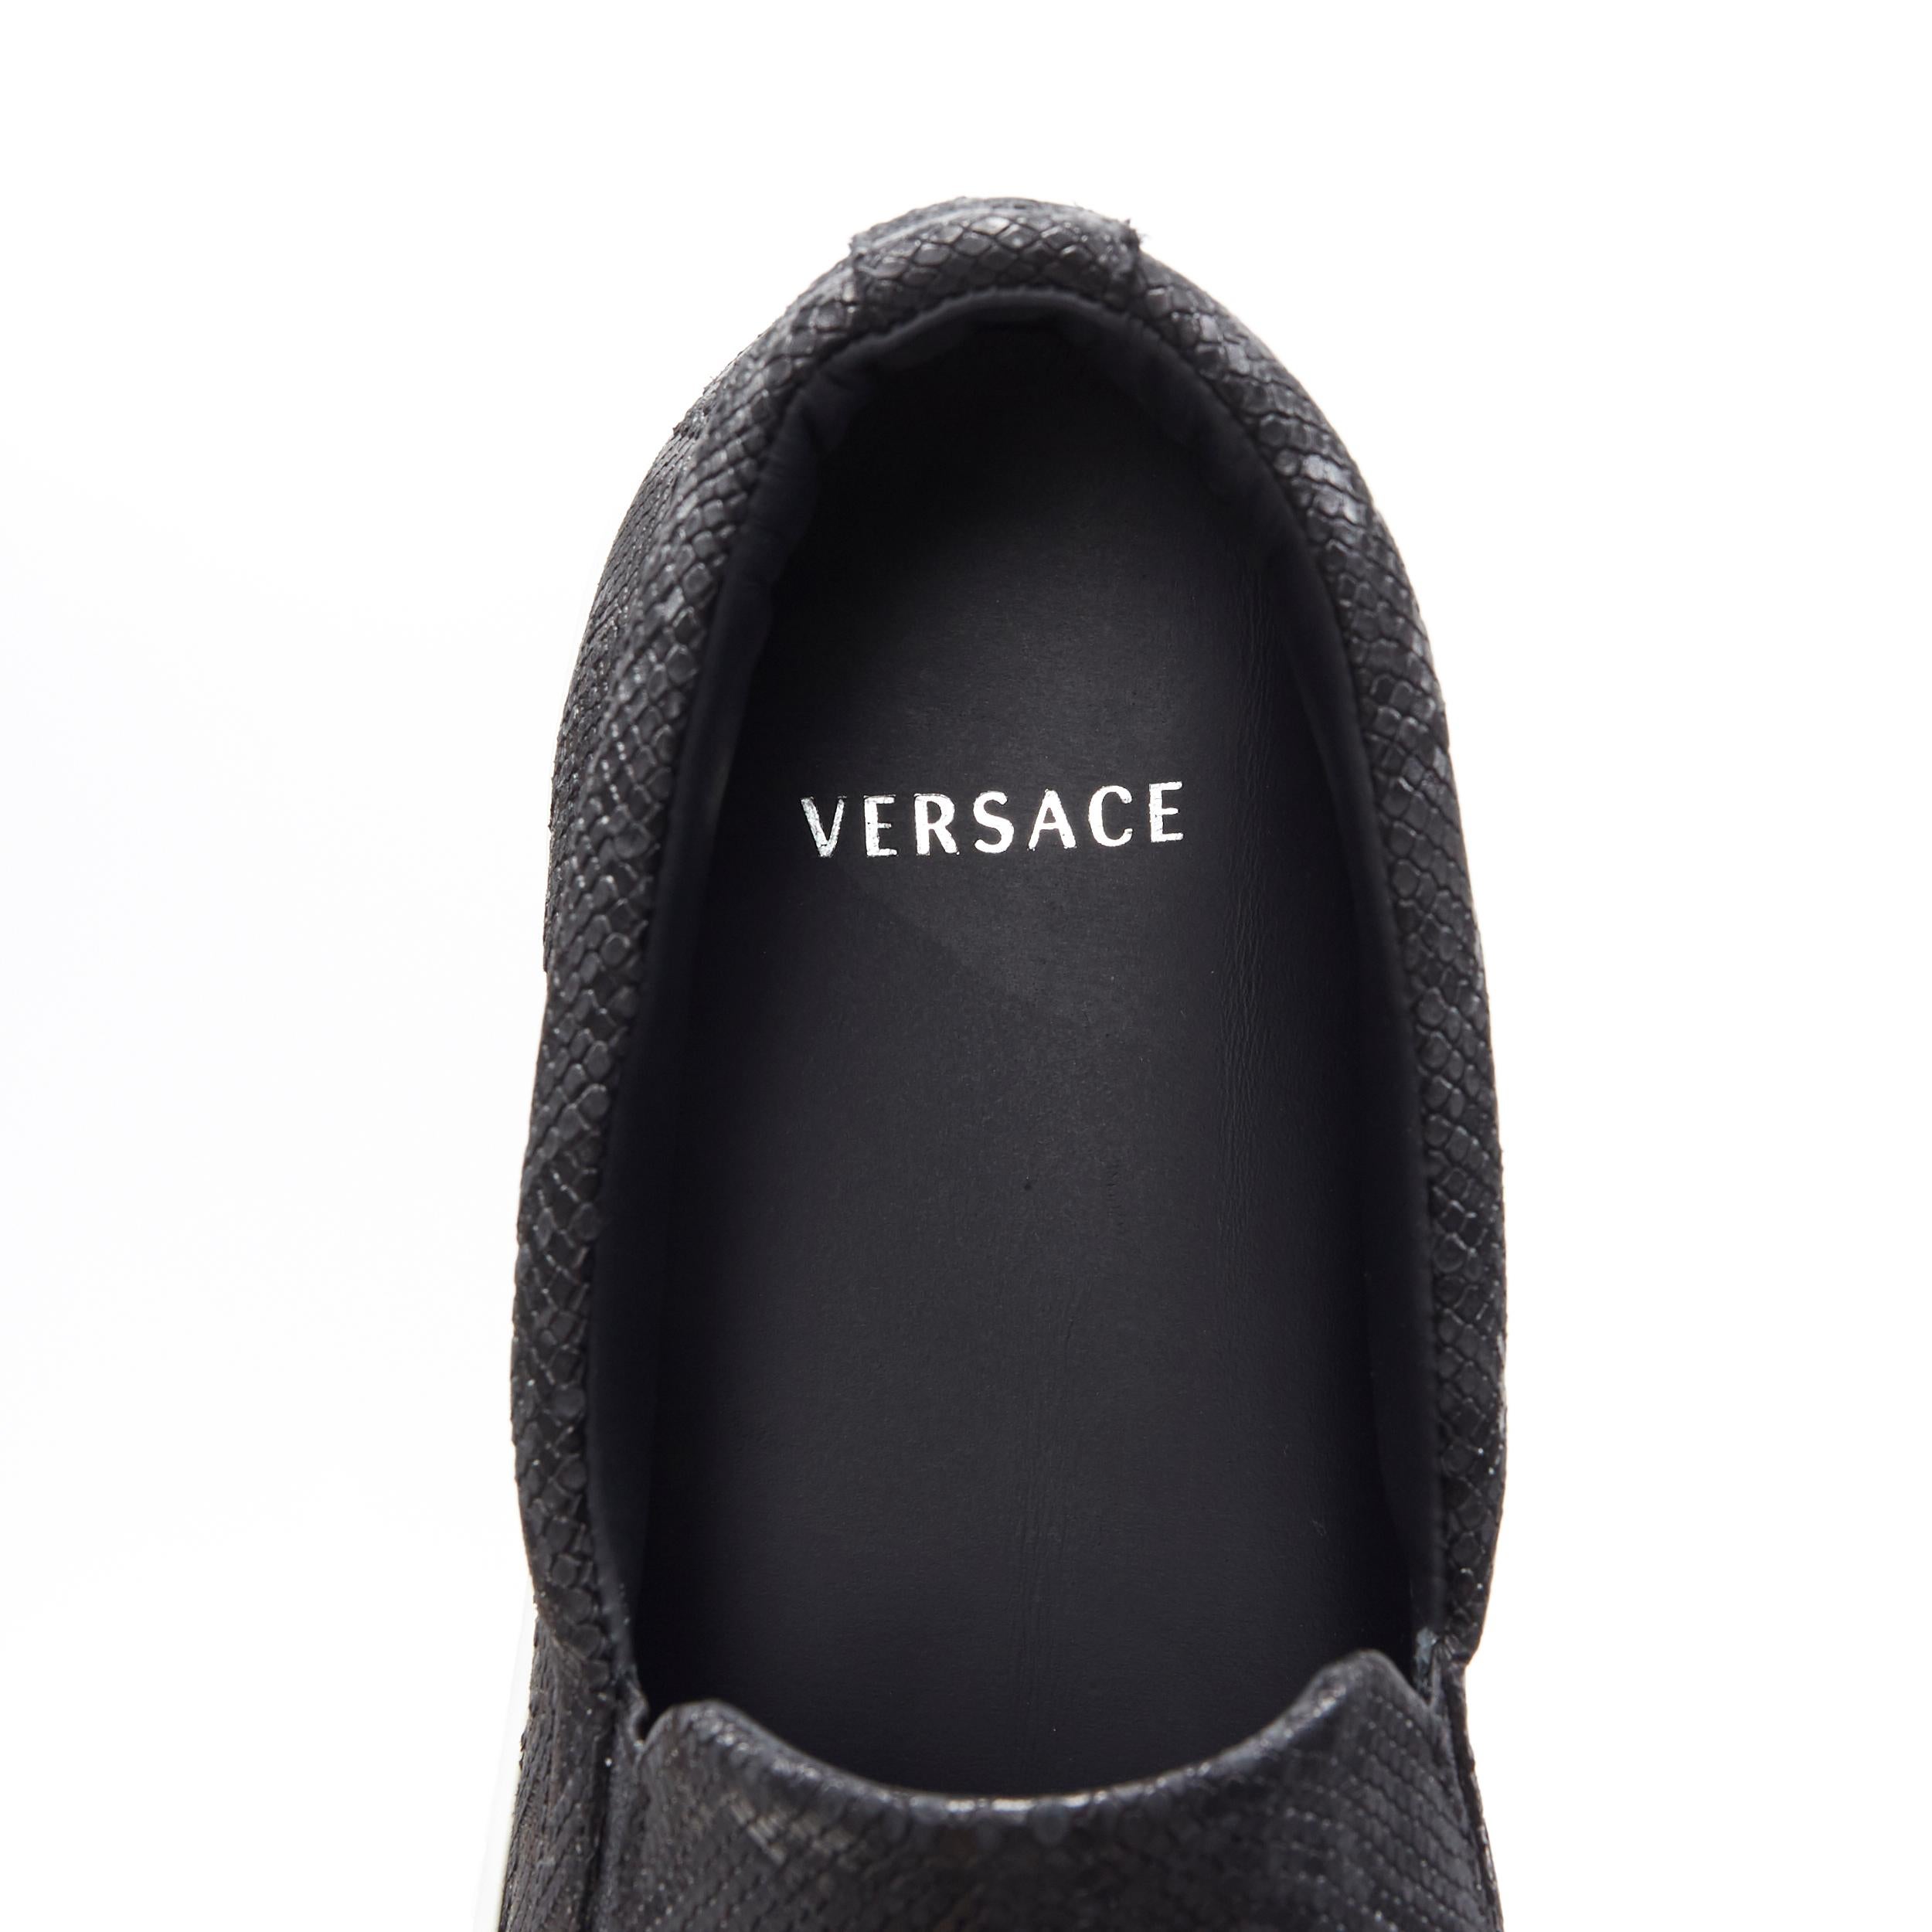 new VERSACE Palazzo Medusa black stamped leather low top skate sneakers EU39 3